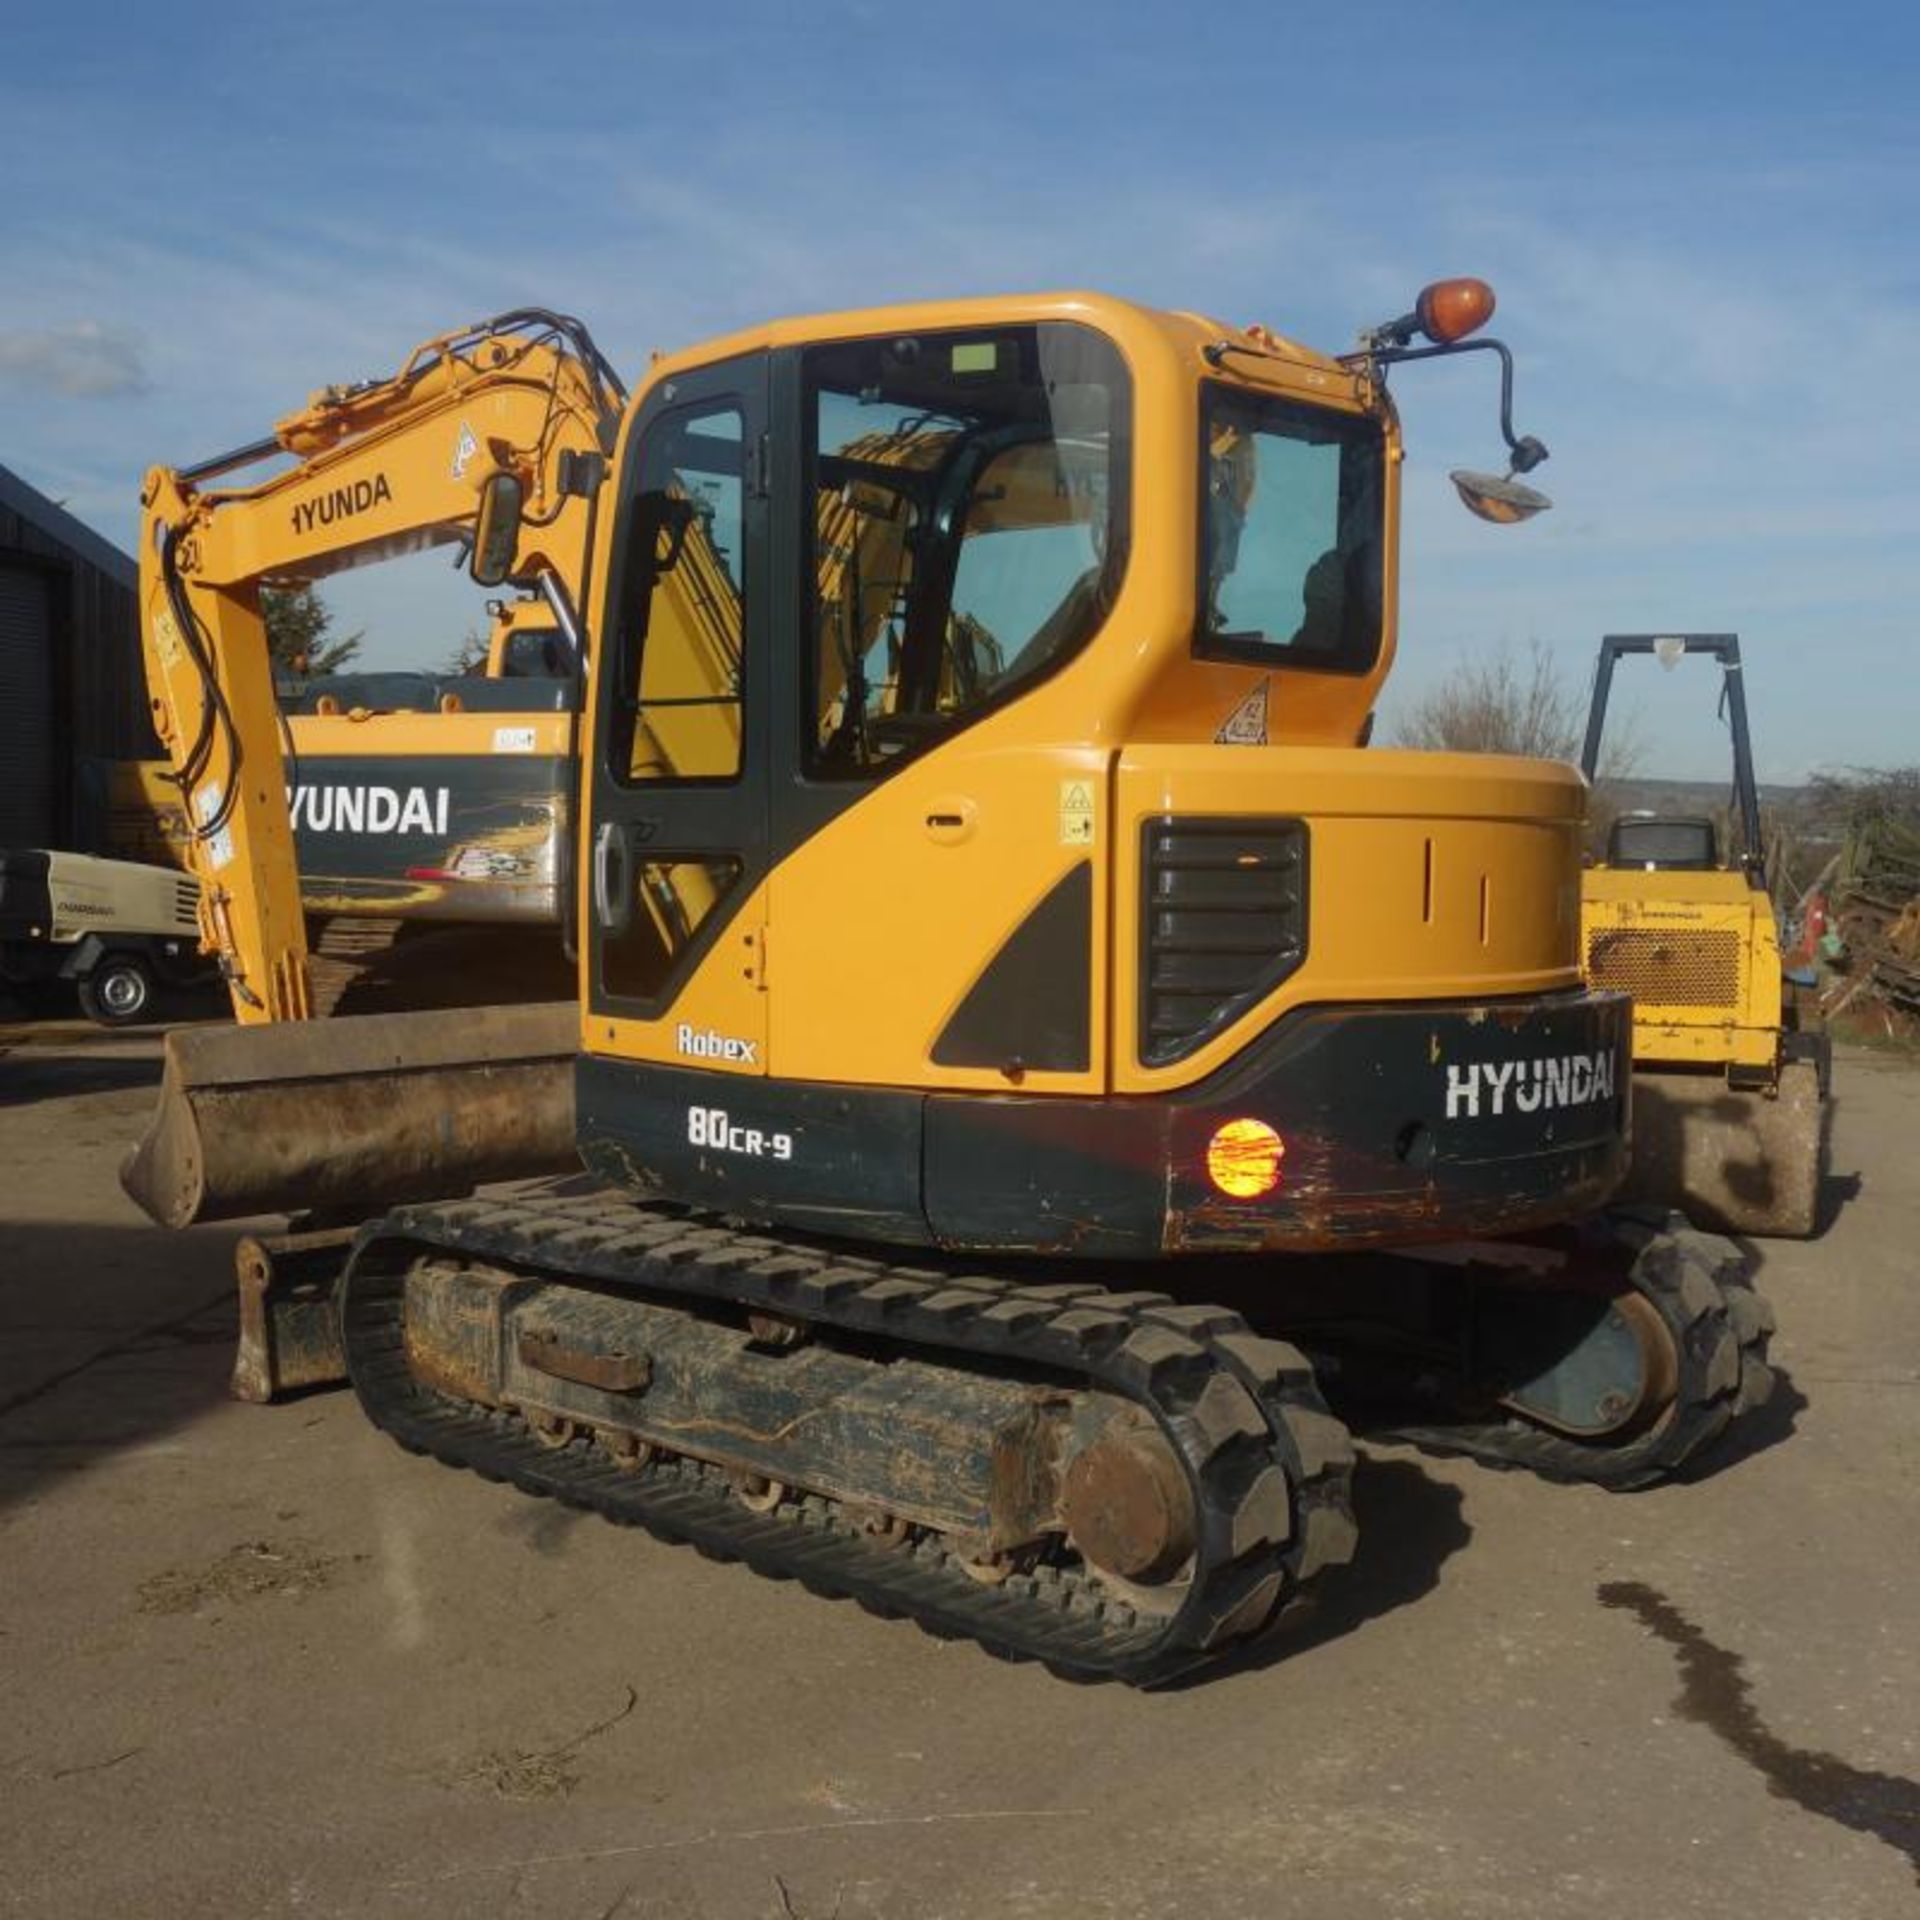 2014 Hyundai 80CR-9 Digger, Comes With 4 Buckets, 2290 Hours From New - Bild 3 aus 10